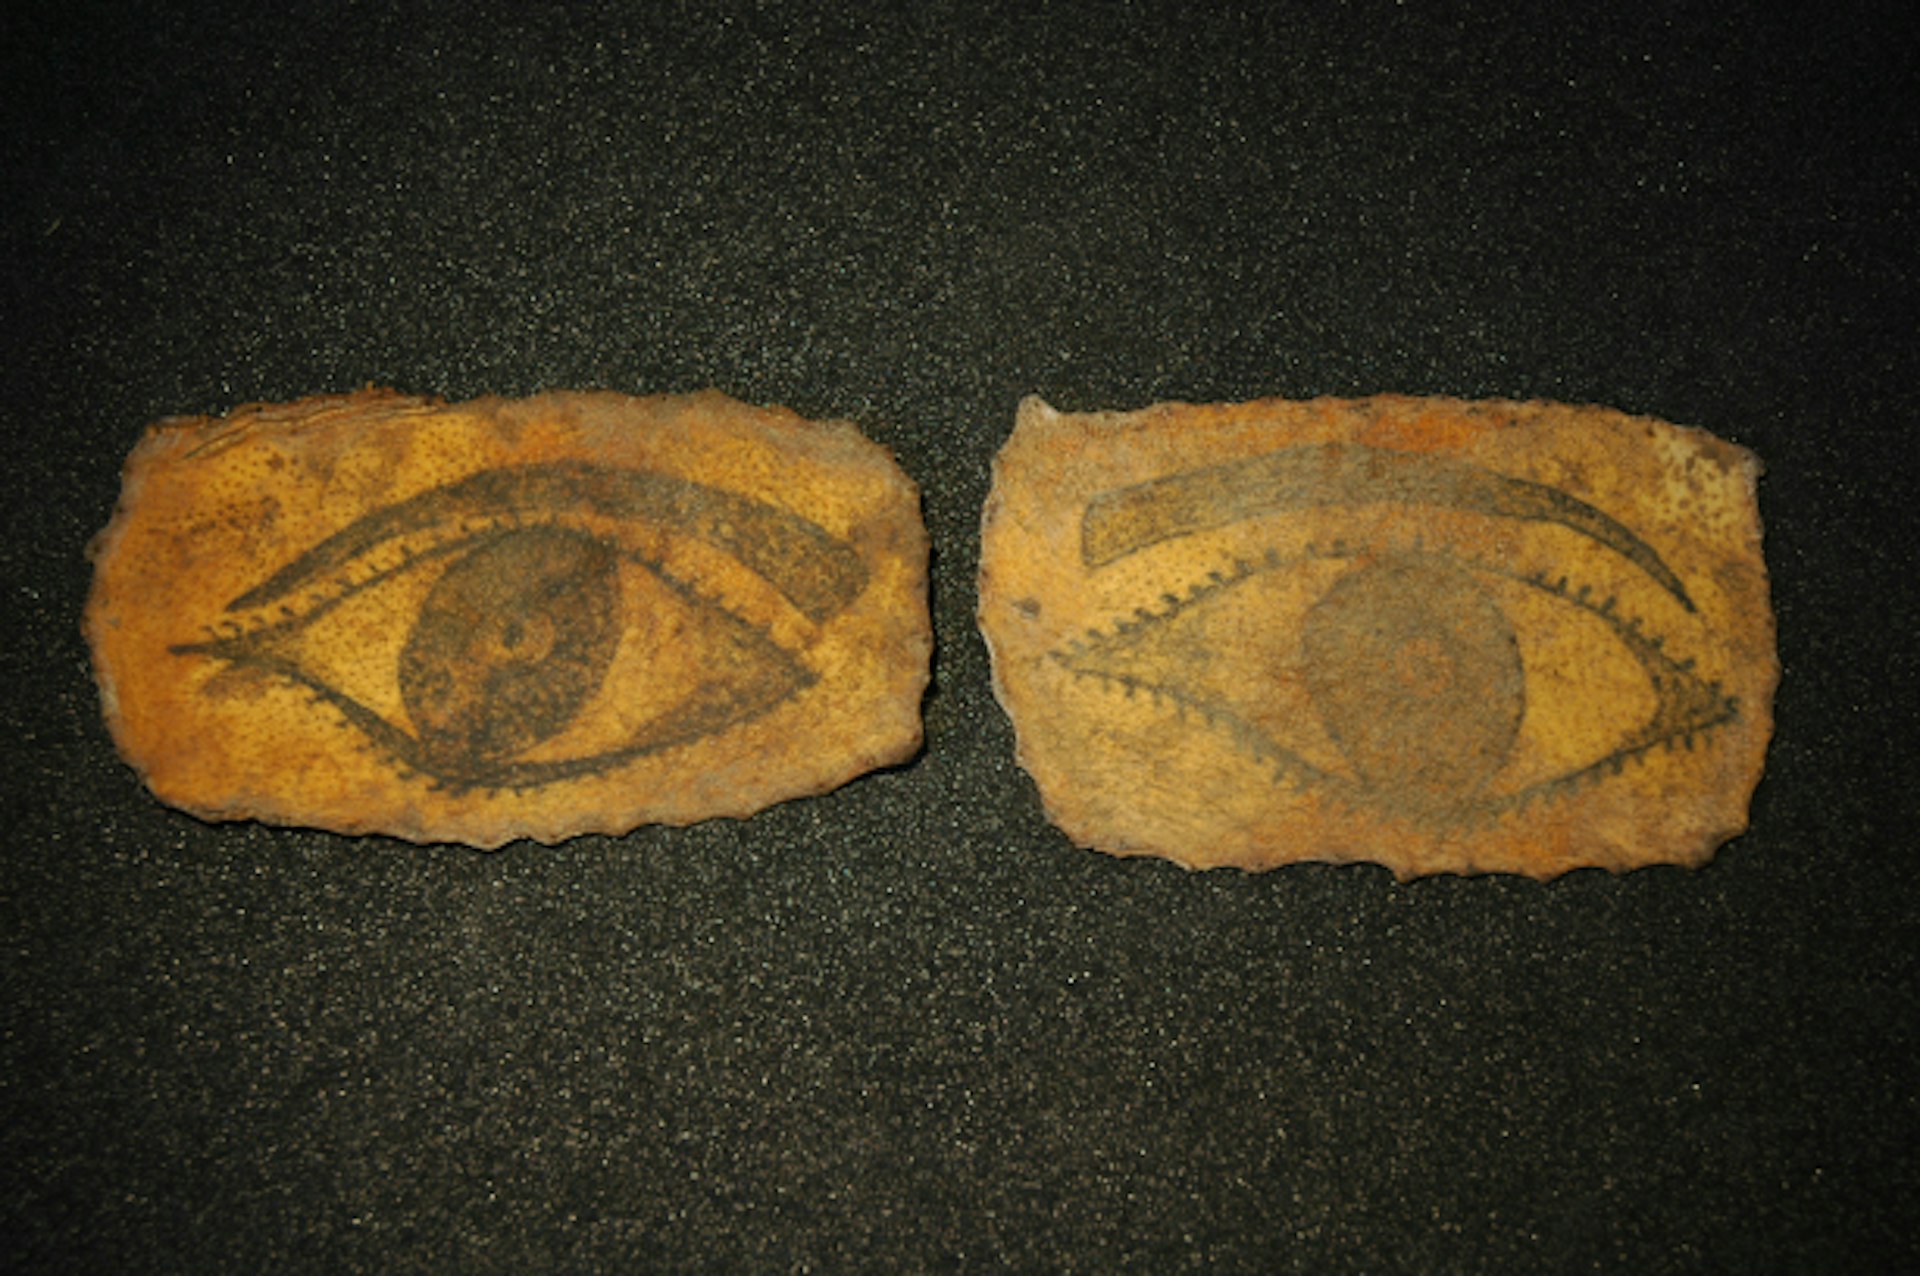 A pair of tattooed eyes. Preserved human skin (Science Museum Object) Photograph Gemma Angel, courtesy of the Science Museum, London